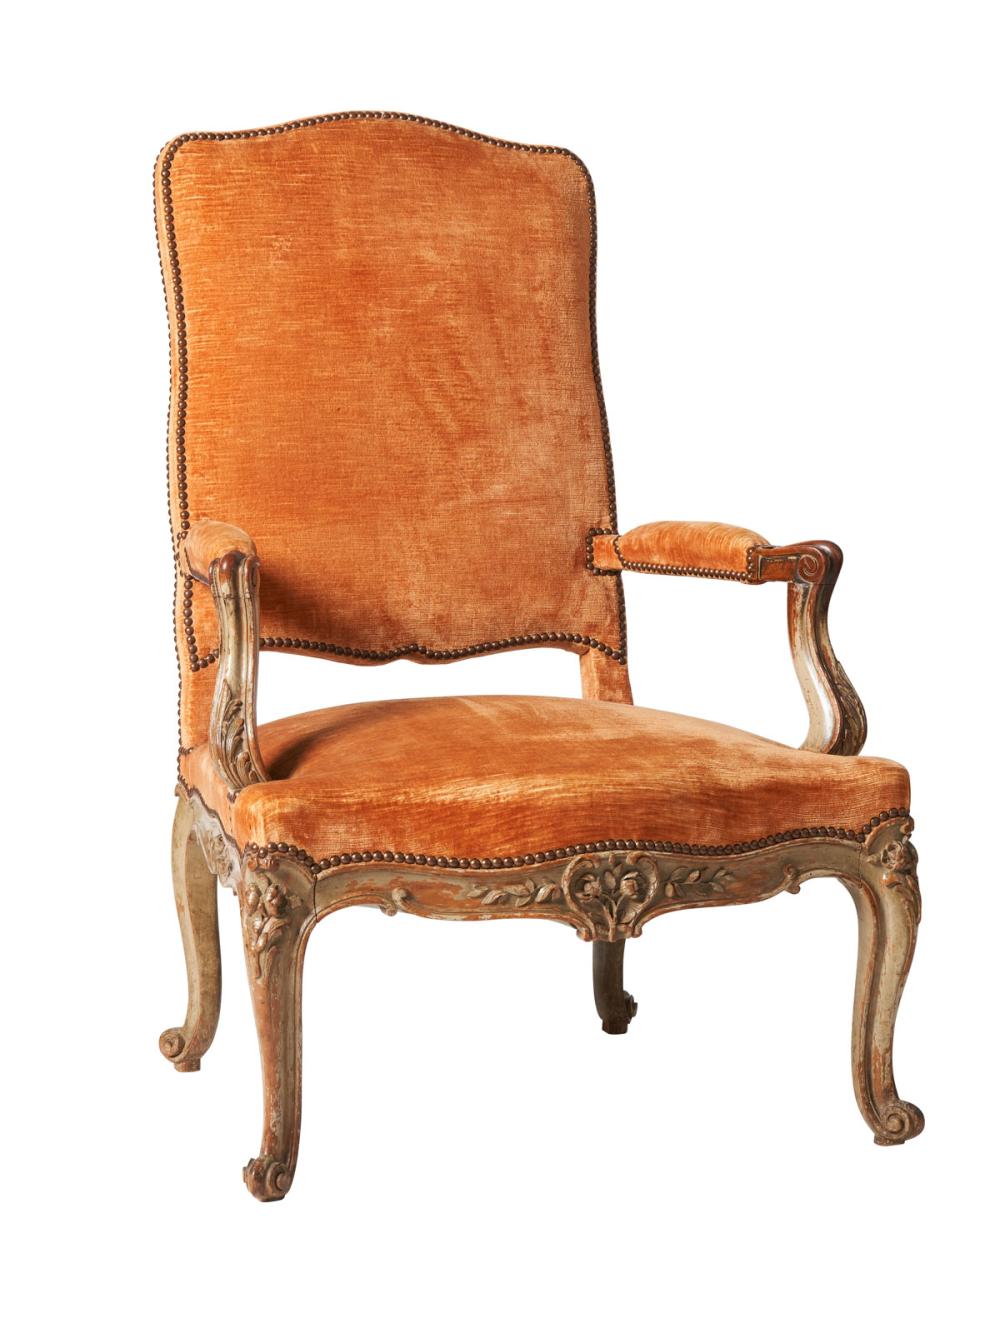 SOLD A Louis XV style carved walnut armchair, French 19th Century